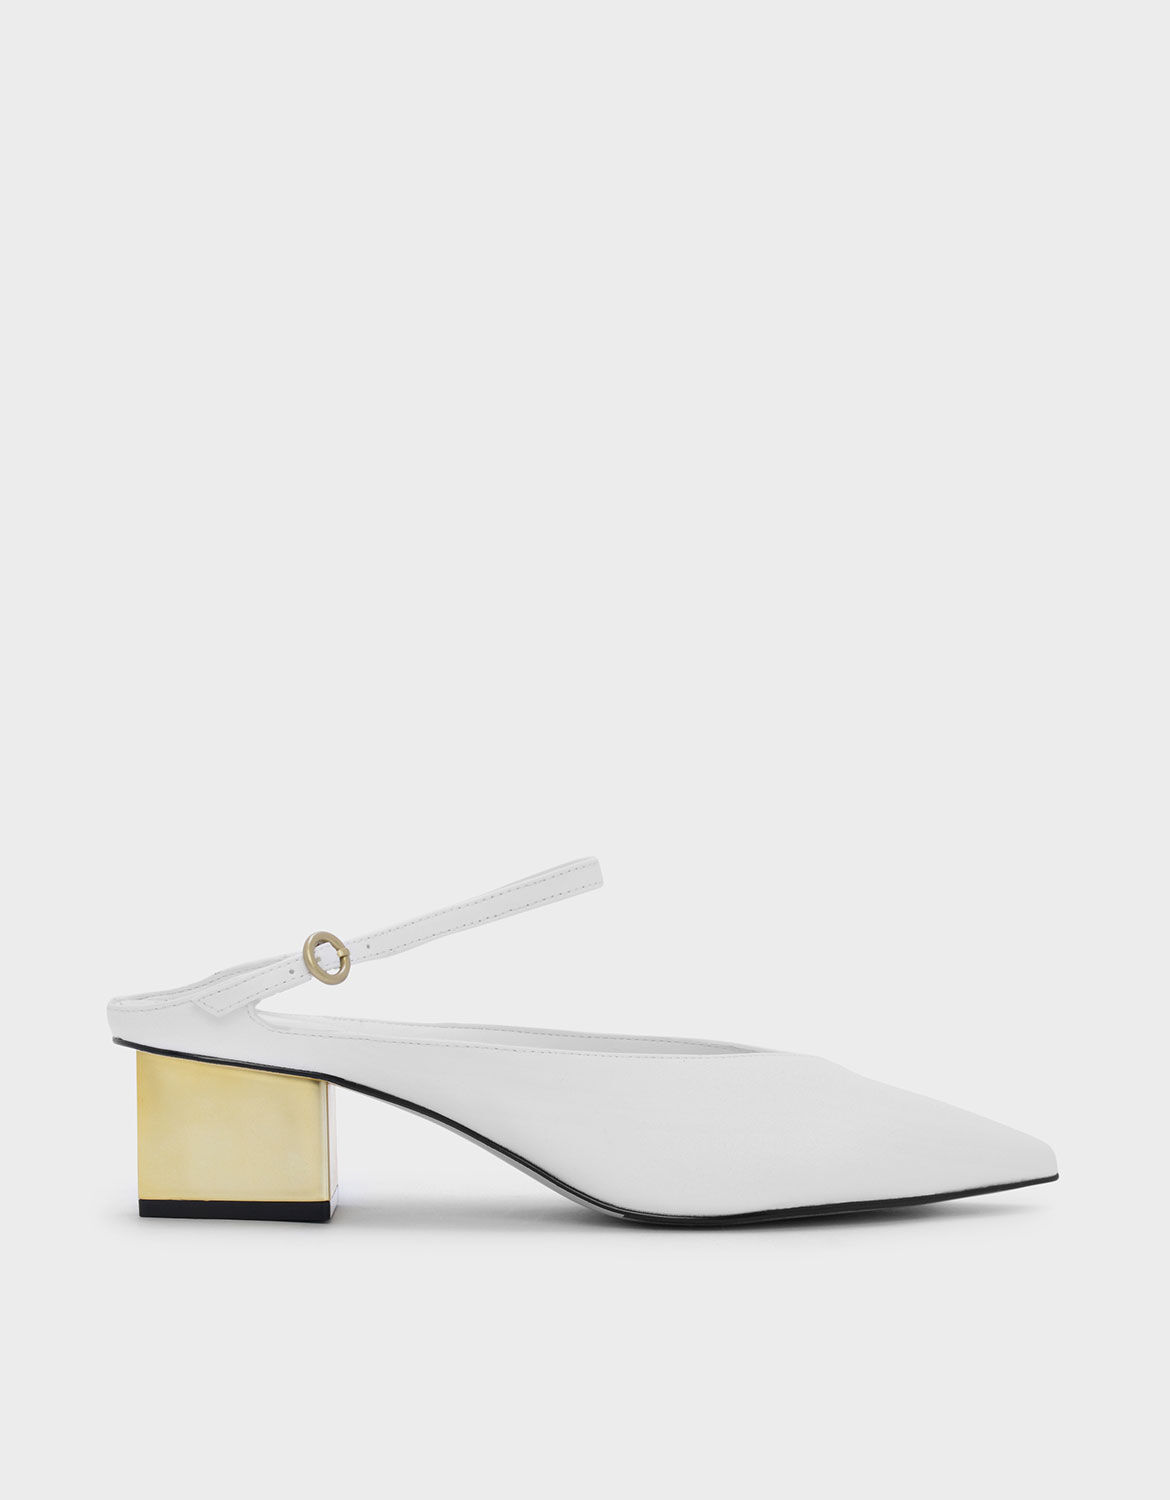 charles and keith white shoes